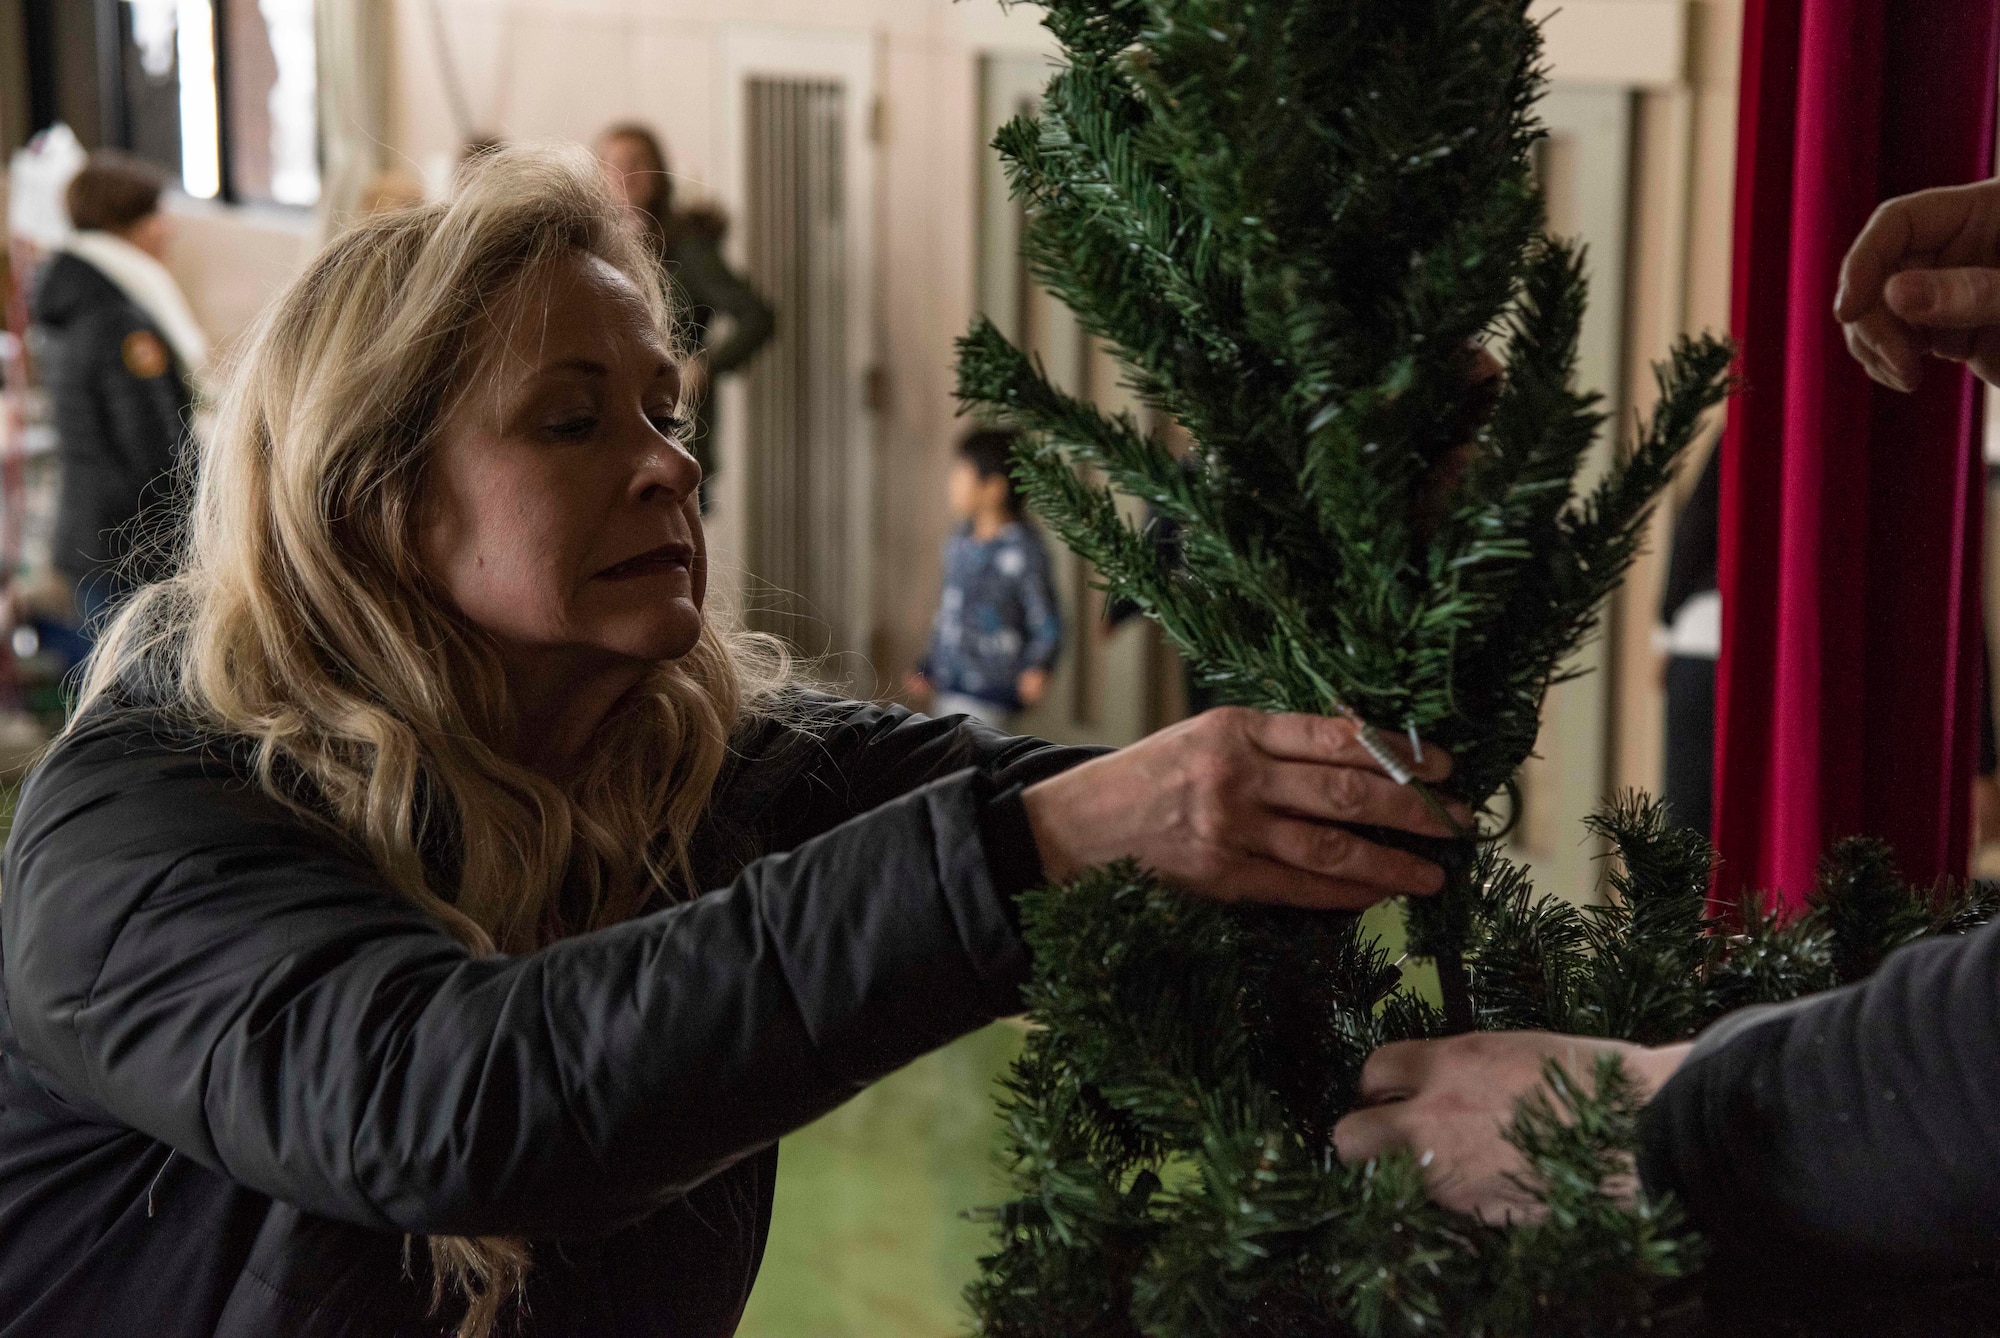 Kristen Cockrum, wife of U.S. Air Force Col. Jason Cockrum, the 35th Operations Group commander, sets up a Christmas tree during a Hirosaki Ai-Sei-En orphanage visit, at Hirosaki, Japan, Dec. 8, 2018. During the visit, members dressed as Santa Claus, Mrs. Claus, elves and reindeer who delivered gifts from the children’s wish lists. (U.S. Air Force photo by Senior Airman Sadie Colbert)